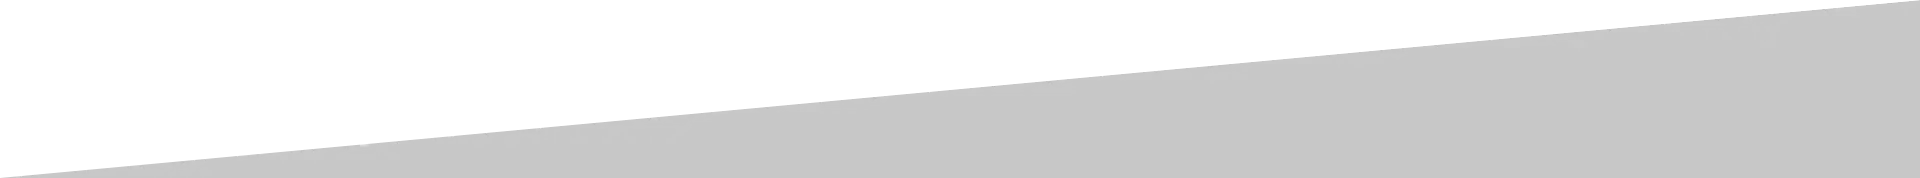 A white background with a gray gradient in the corner.